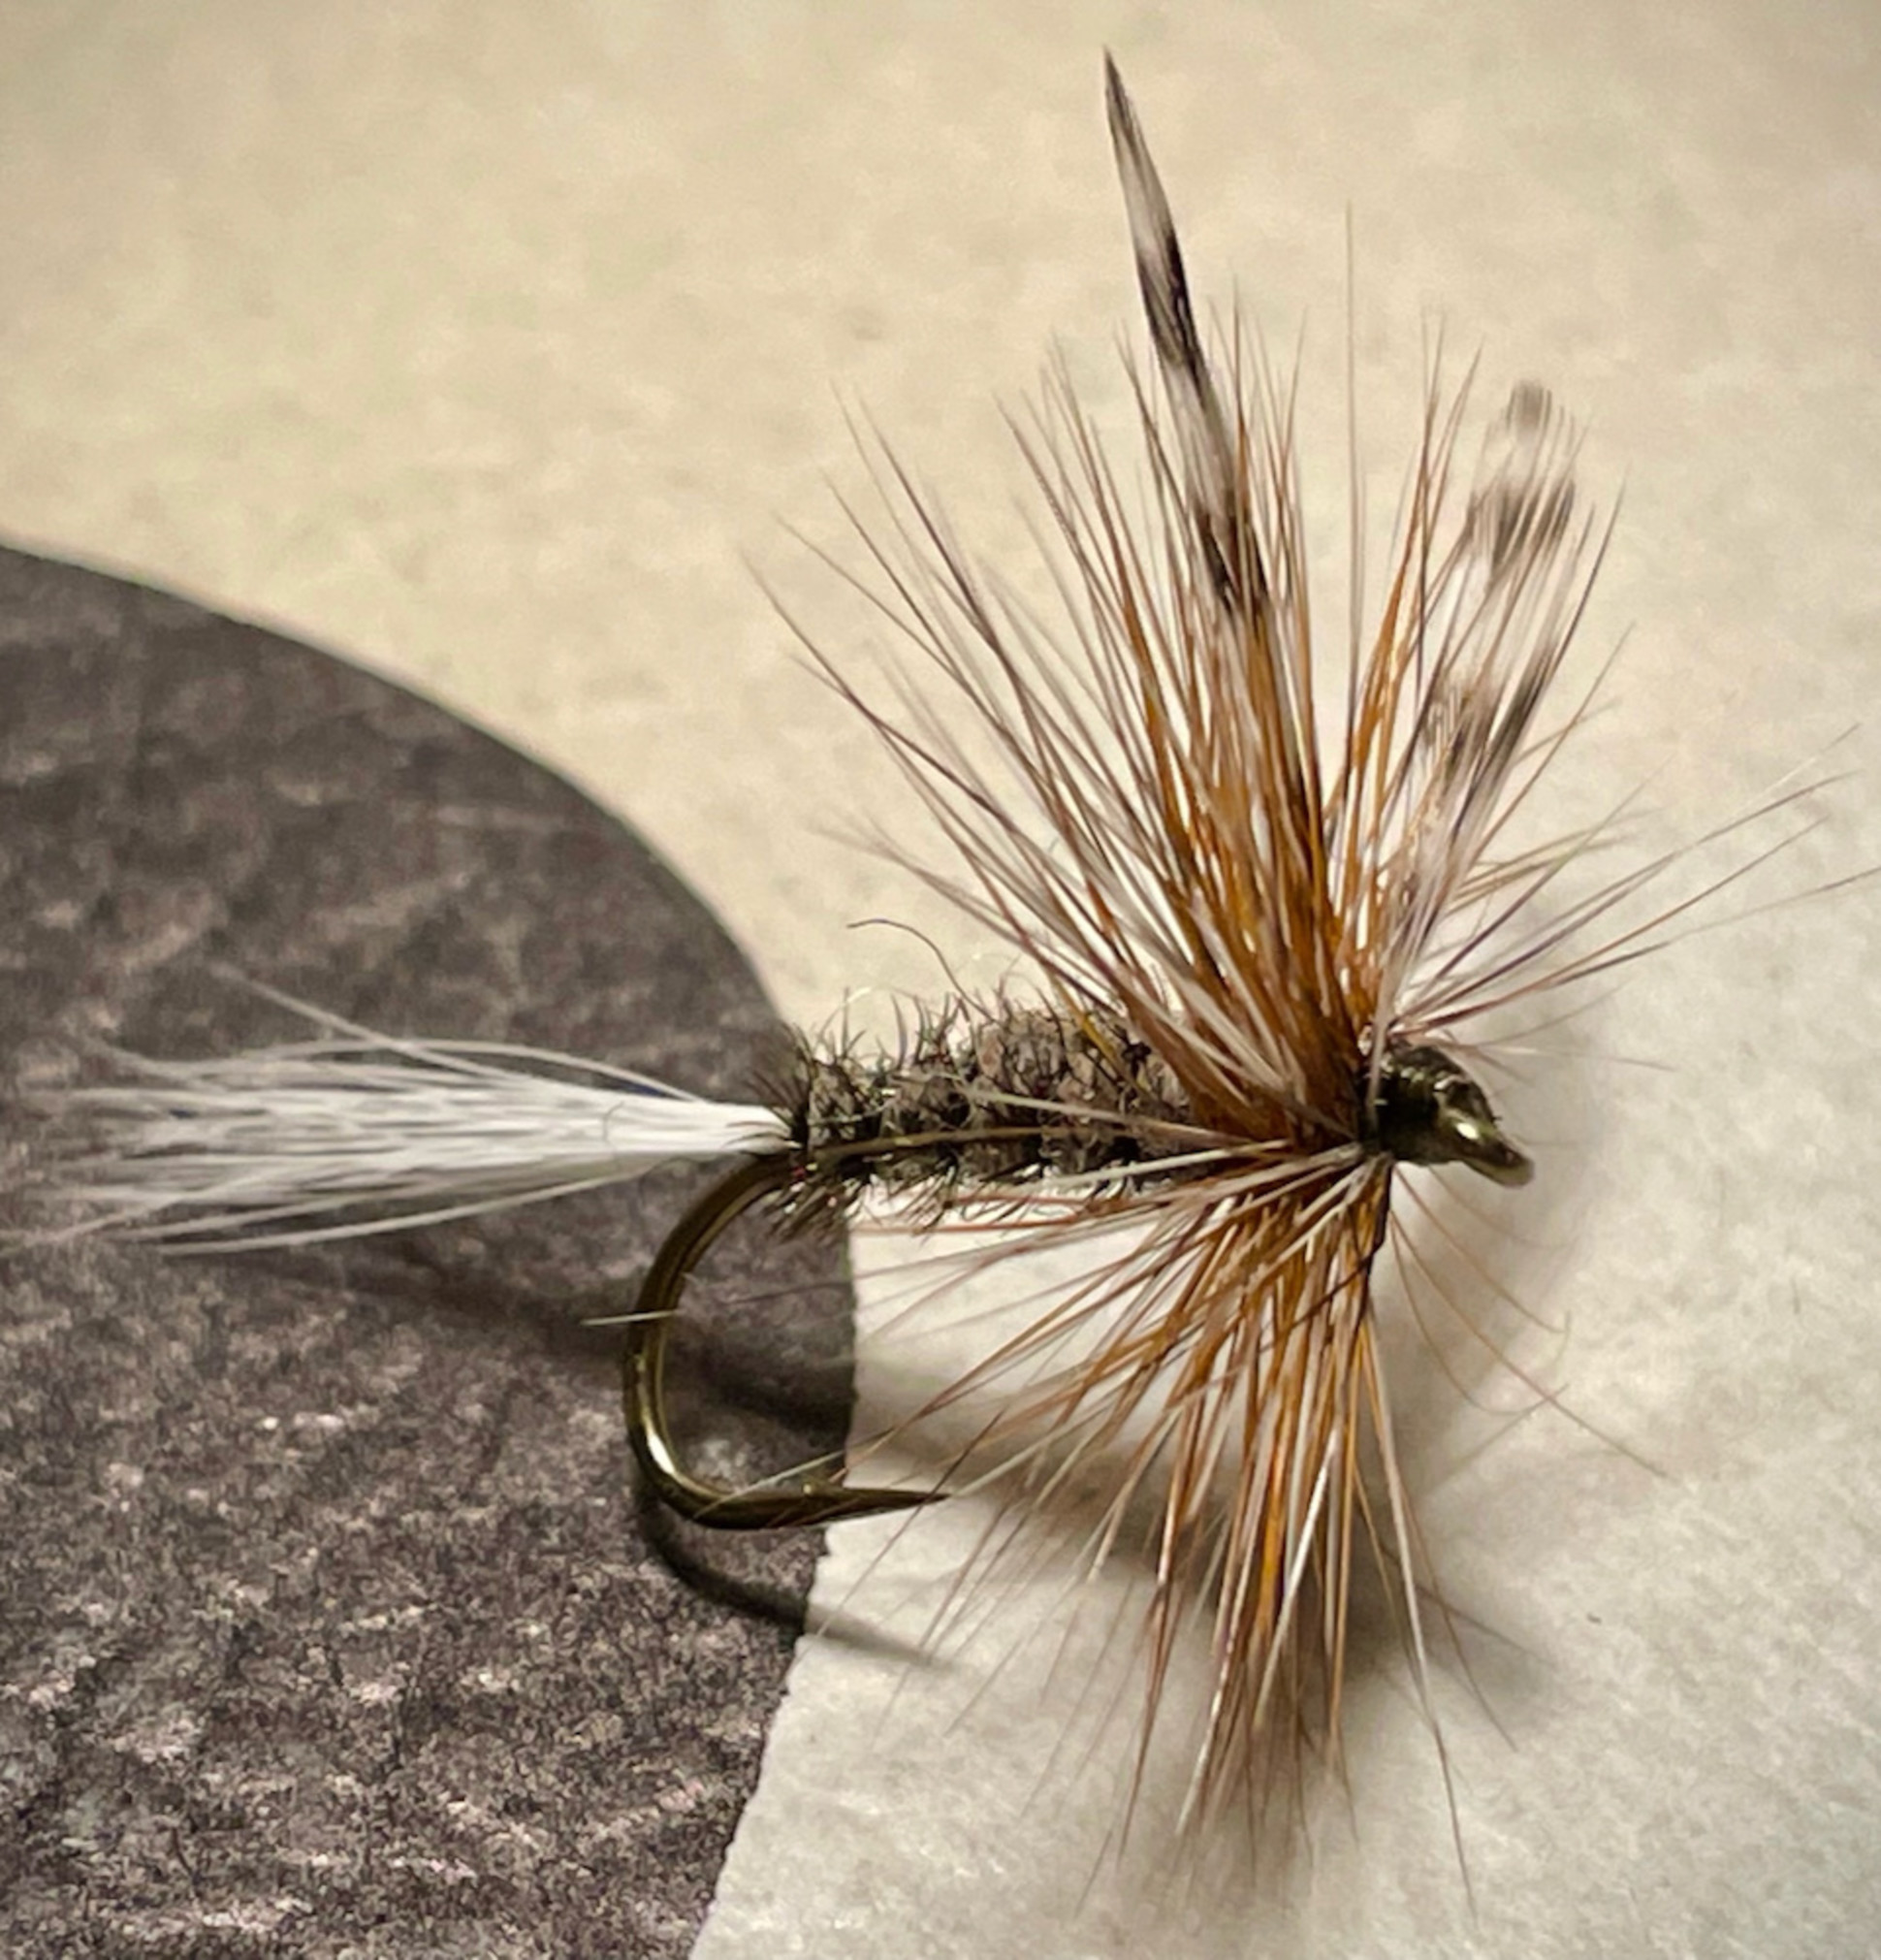 Latest Fly Fishing News and Reports - Vintage Fly Challenge - Royal ...